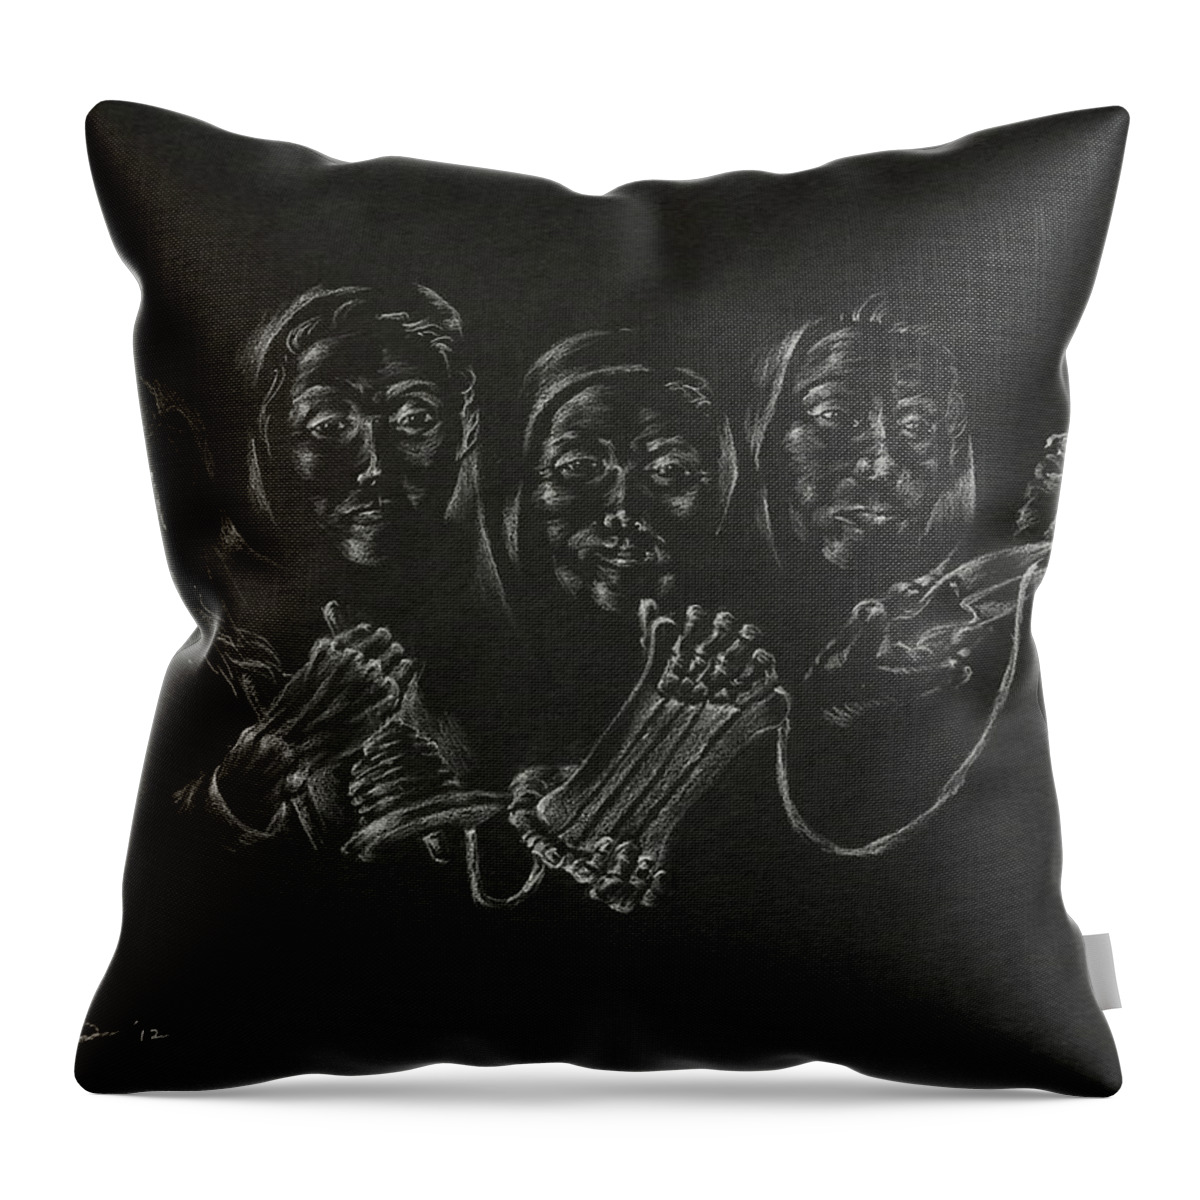 Mythology Throw Pillow featuring the drawing The Fates by Michele Myers